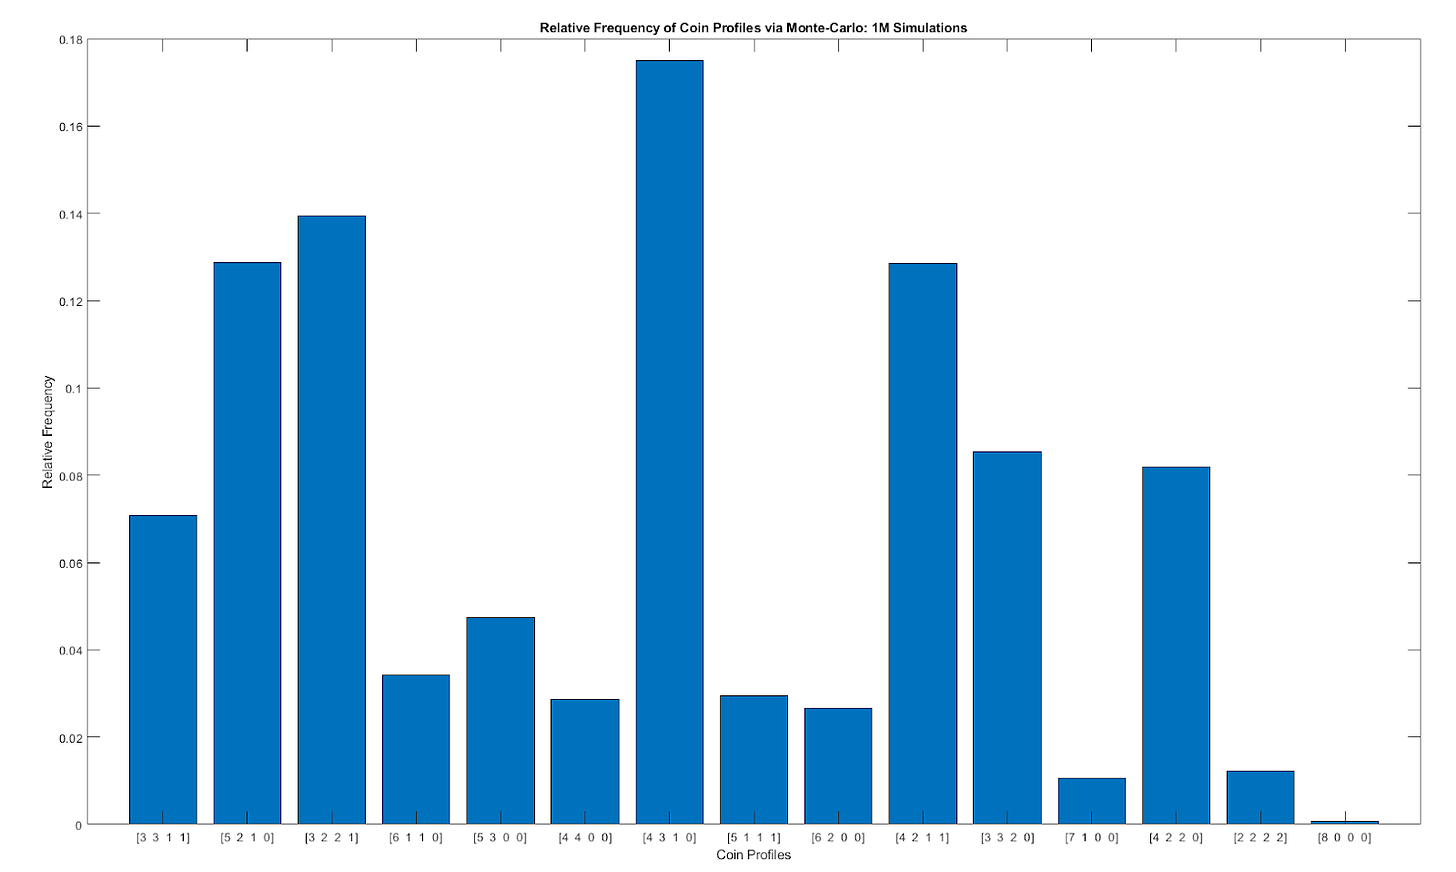 A histogram showing the relative frequencies of the 15 possible quadruples. The most likely was (4, 3, 1, 0), followed by (3, 2, 2, 1). The least likely was (8, 0, 0, 0).